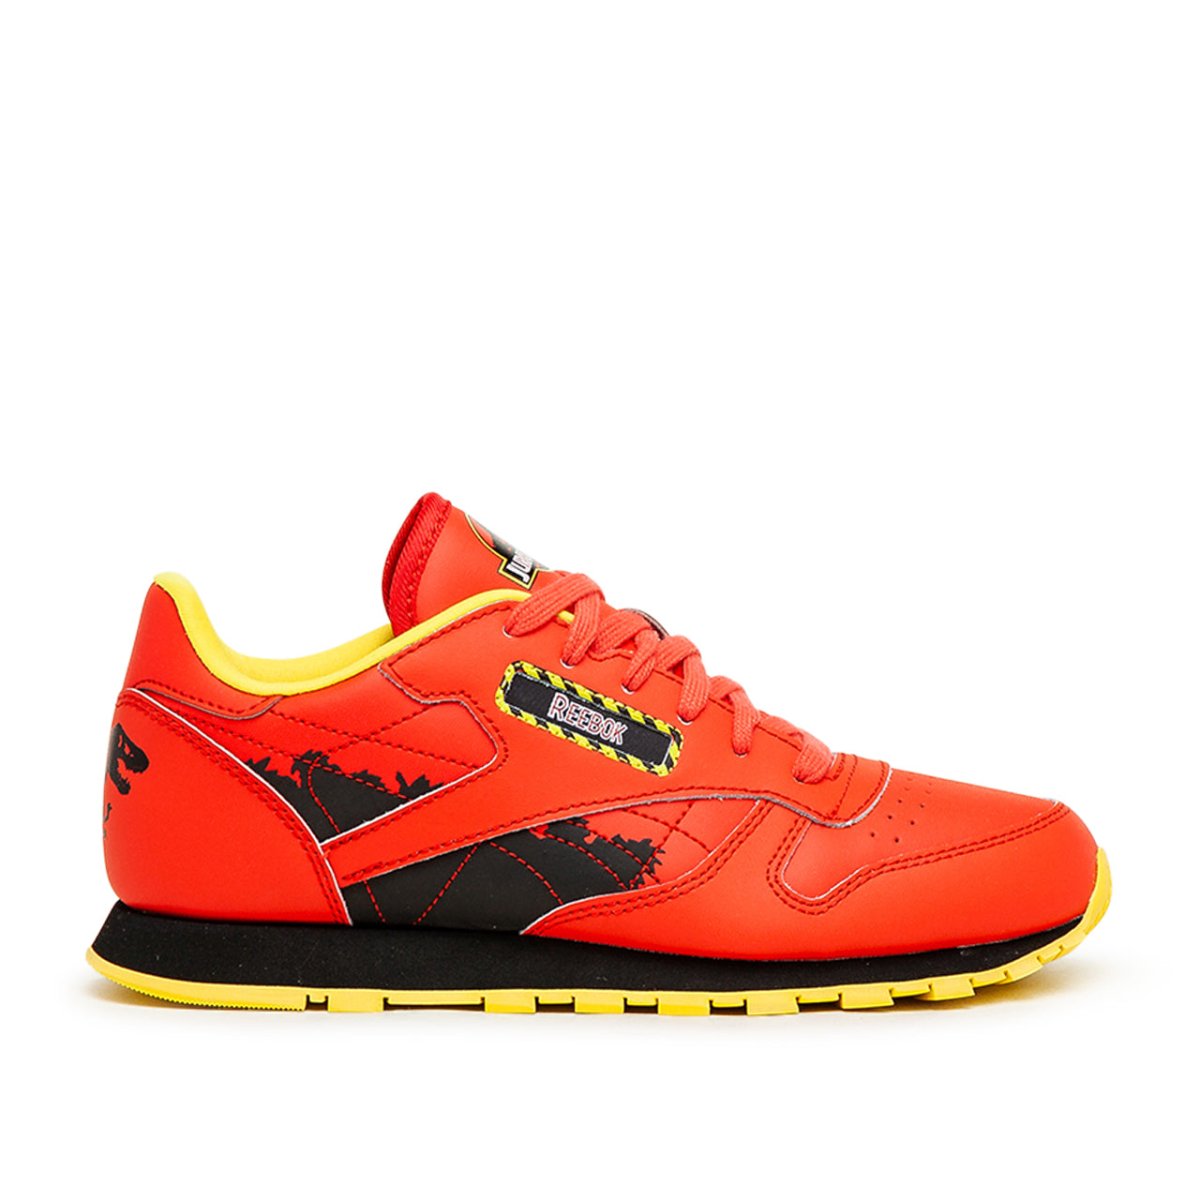 Image of Reebok x Jurassic Park CL Leather (Red / Yellow)